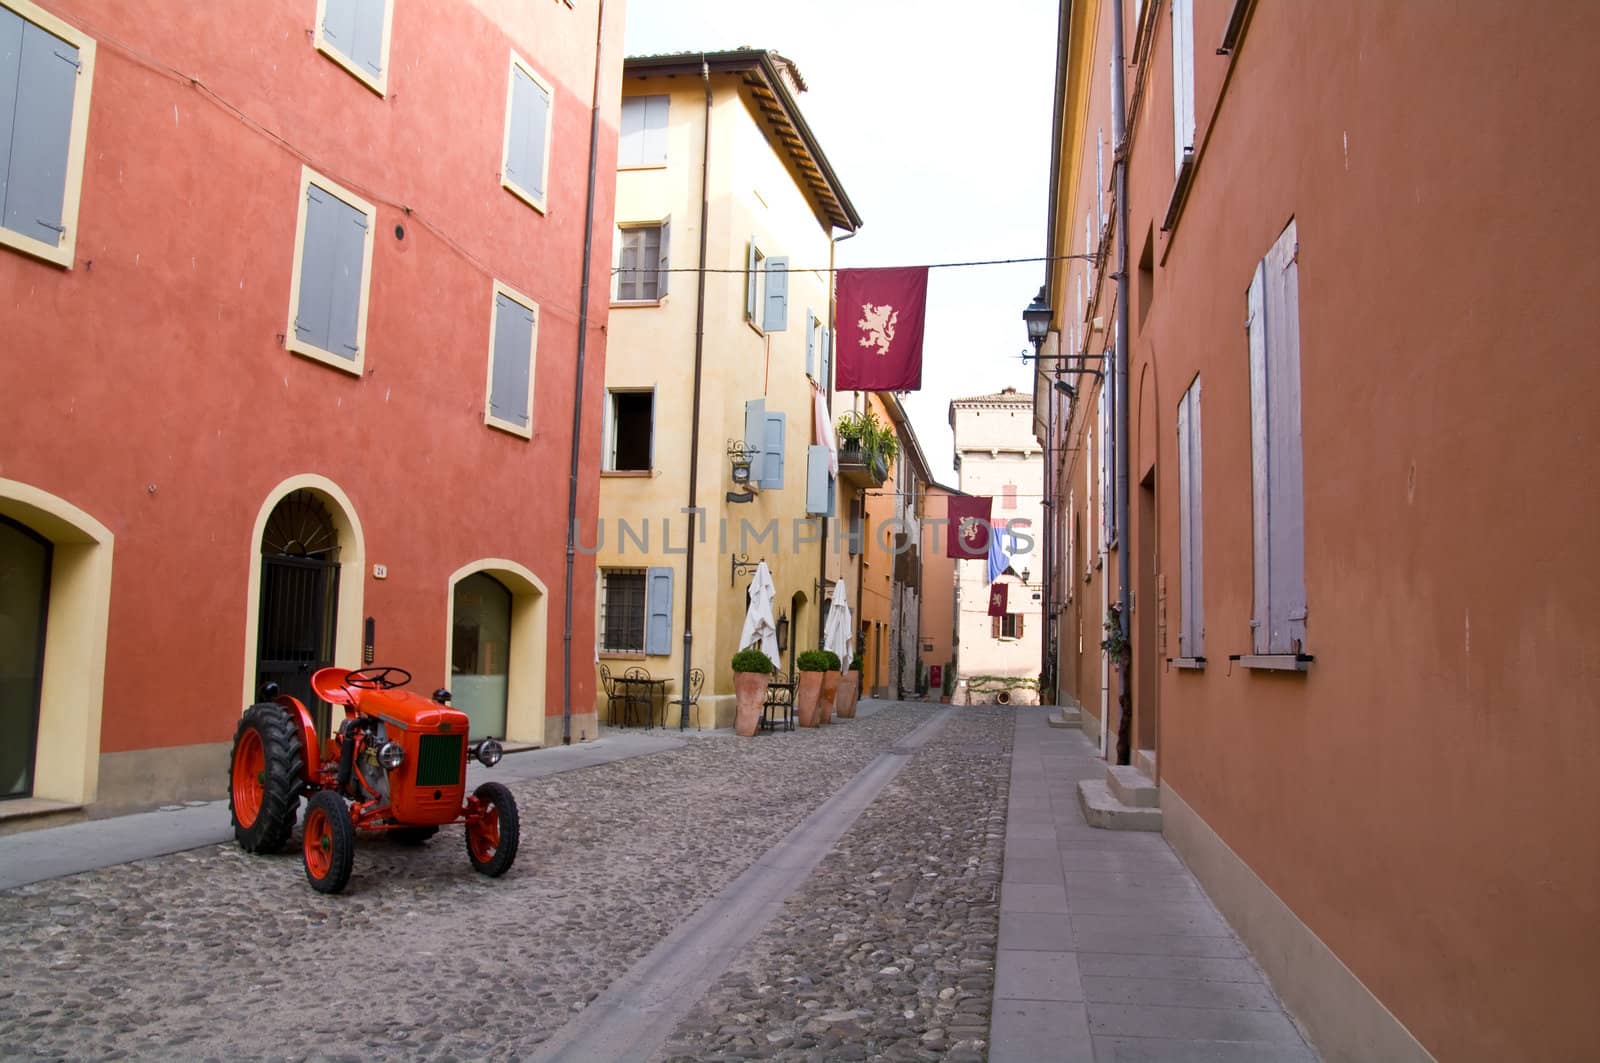 A street in the old centre of Castelvetro, Italy